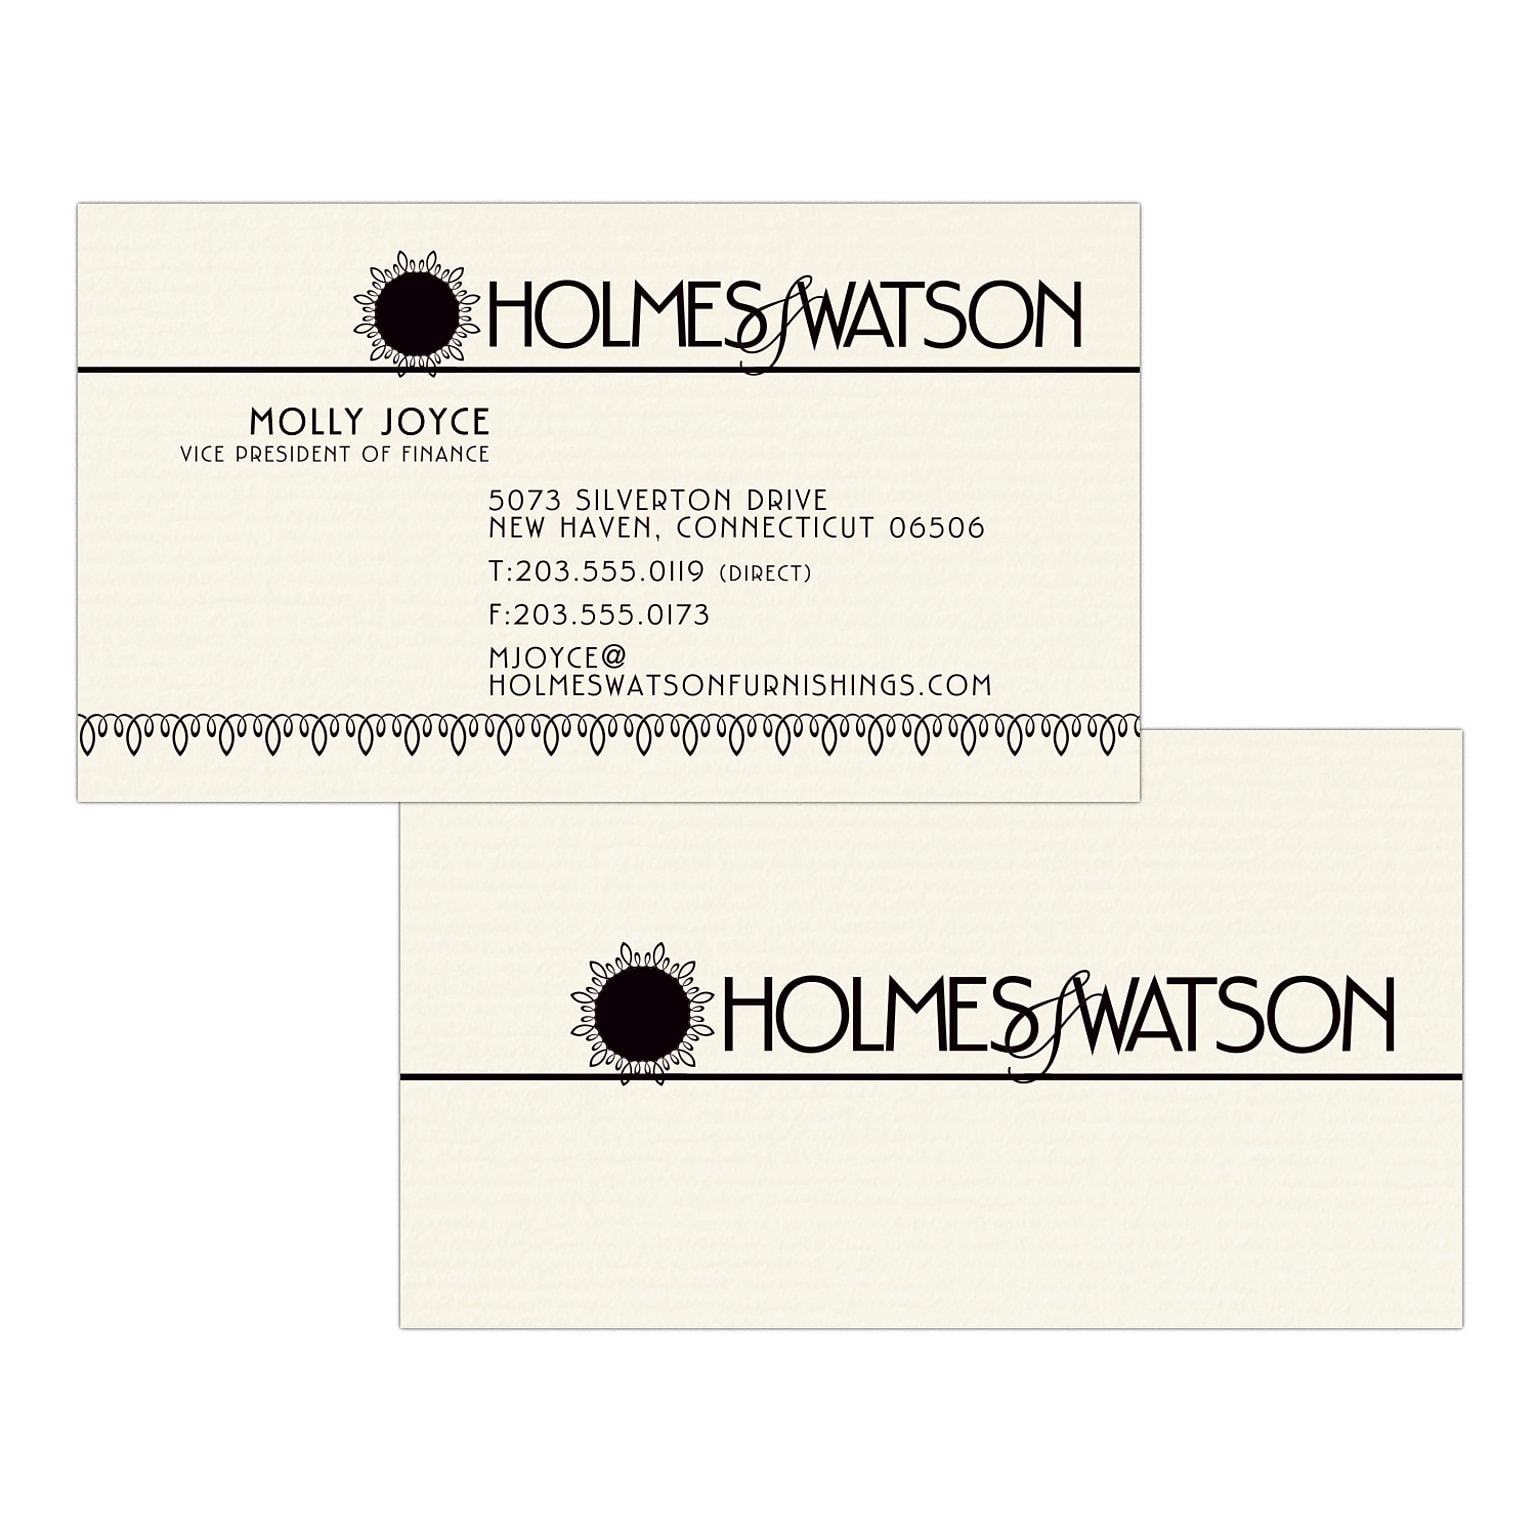 Custom 1-2 Color Business Cards, CLASSIC® Laid Natural White 80#, Flat Print, 1 Standard Ink, 2-Sided, 250/PK